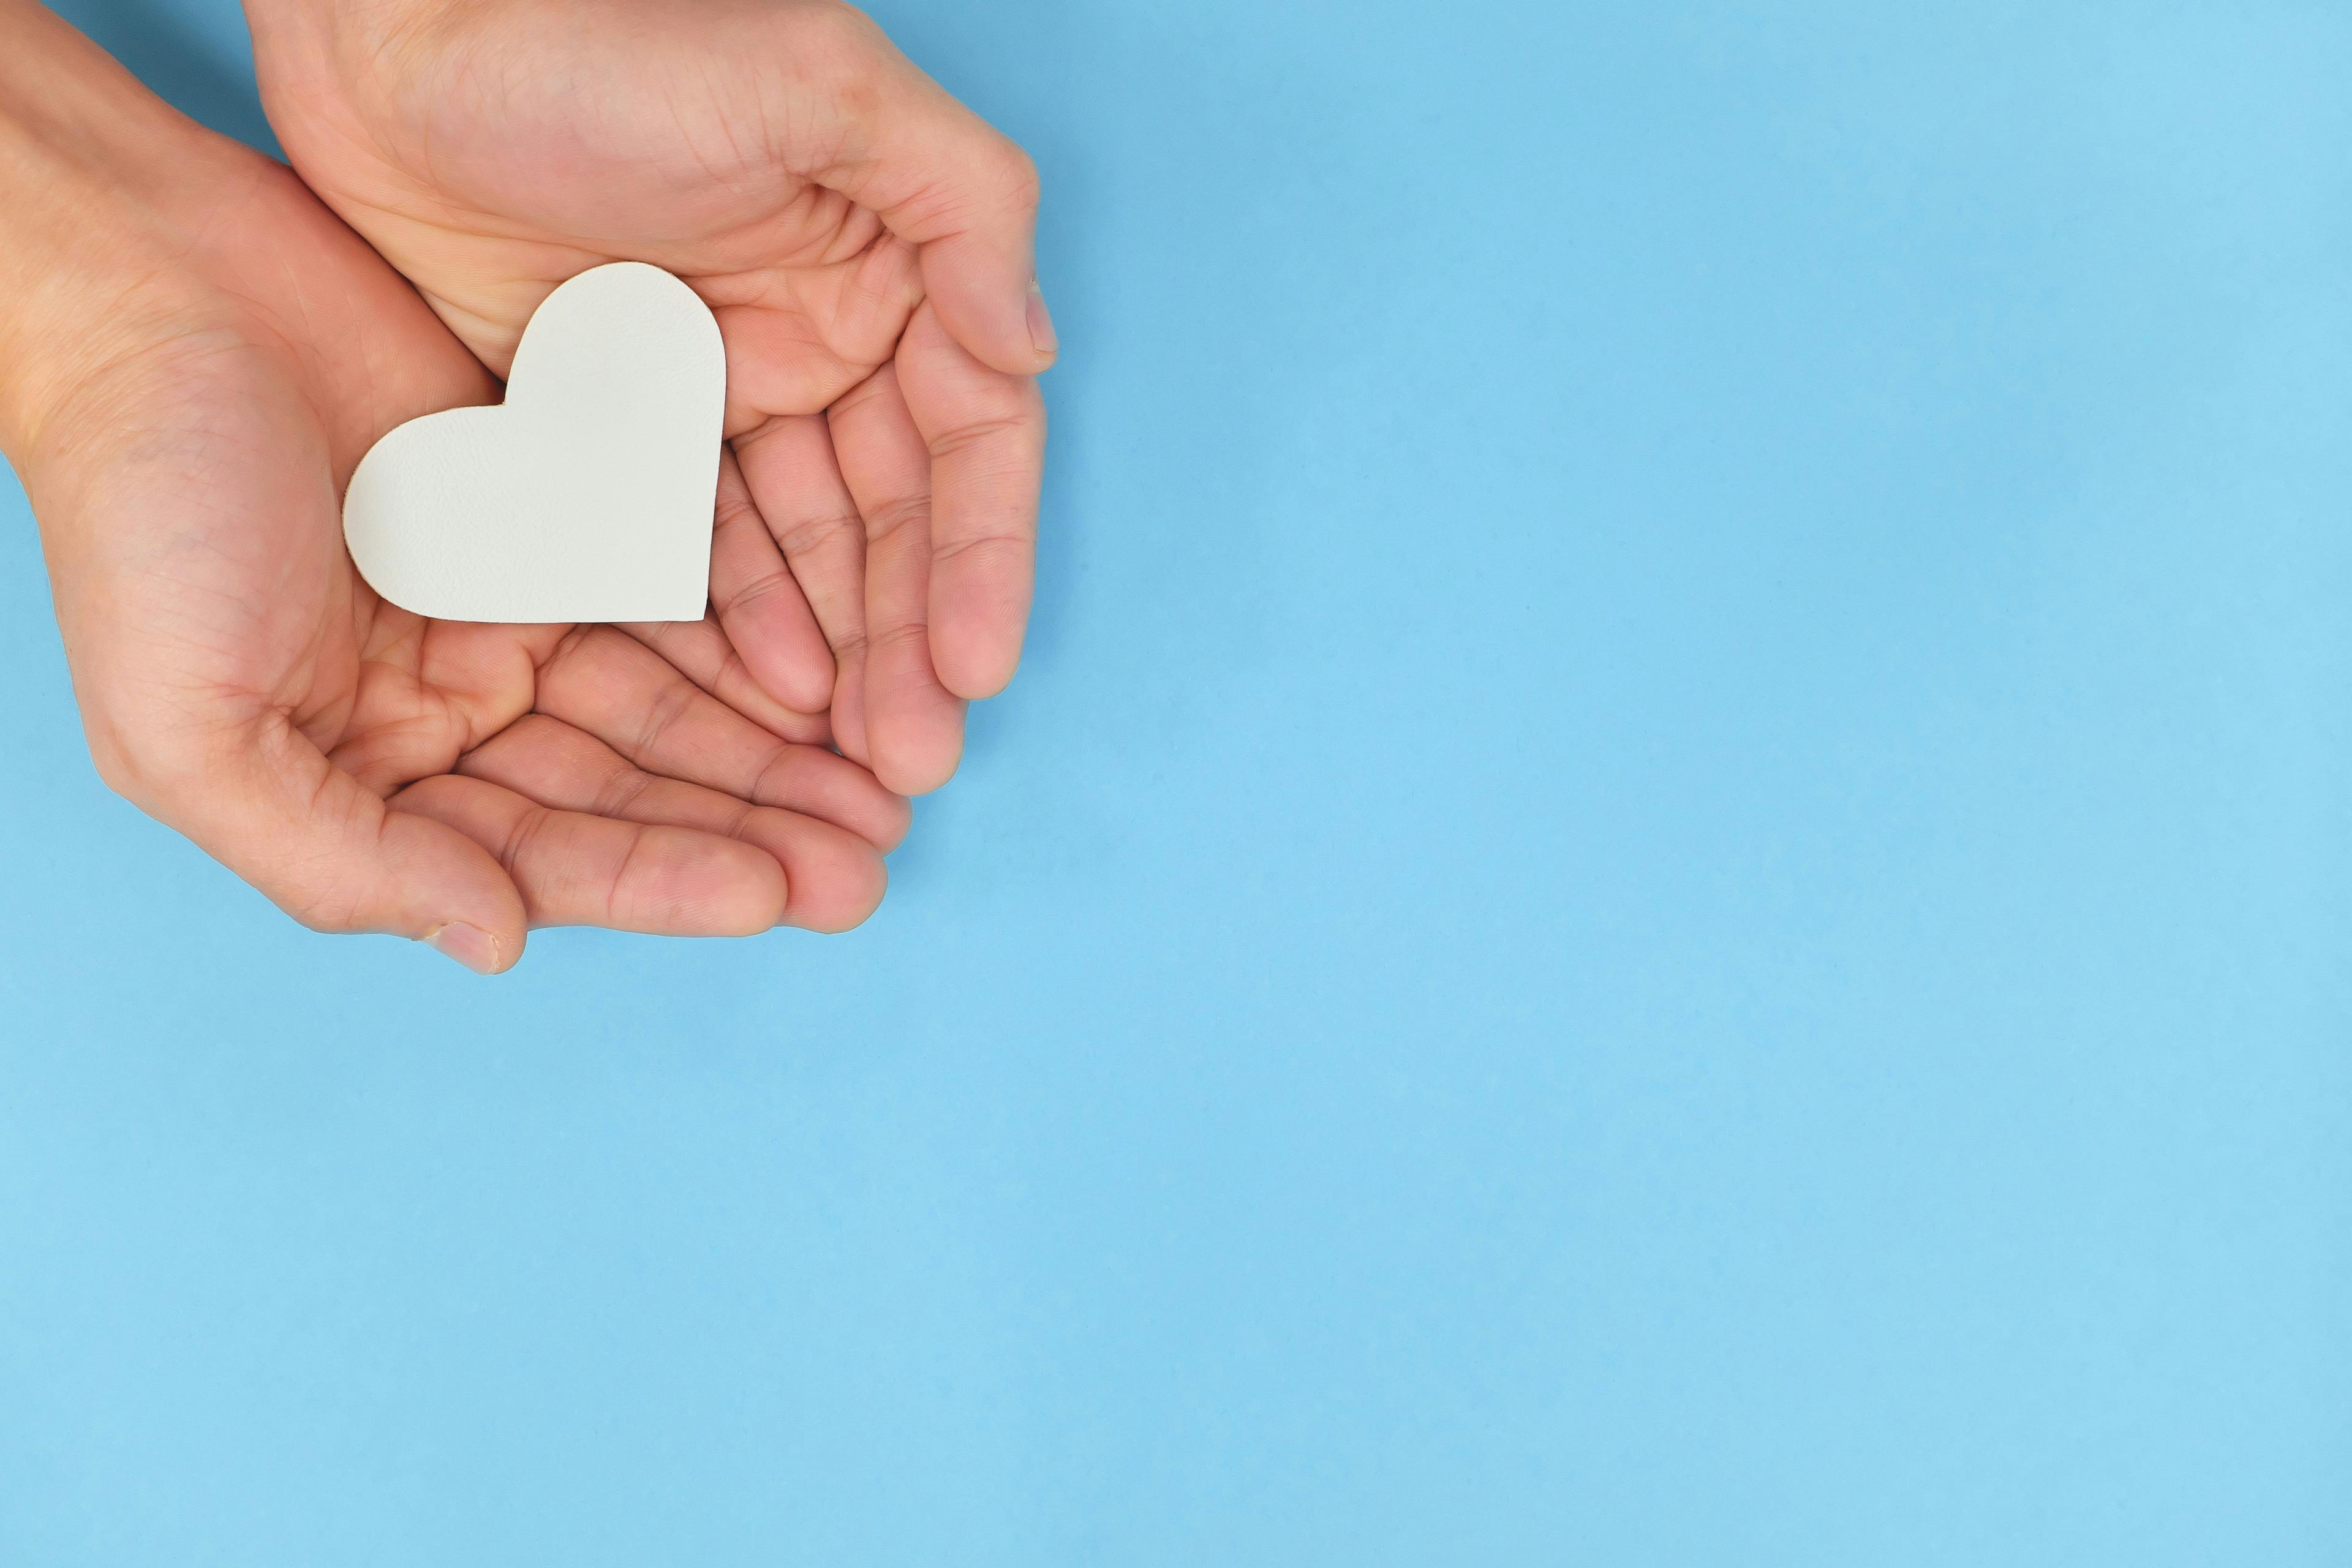 hands holding a white heart with a blue background